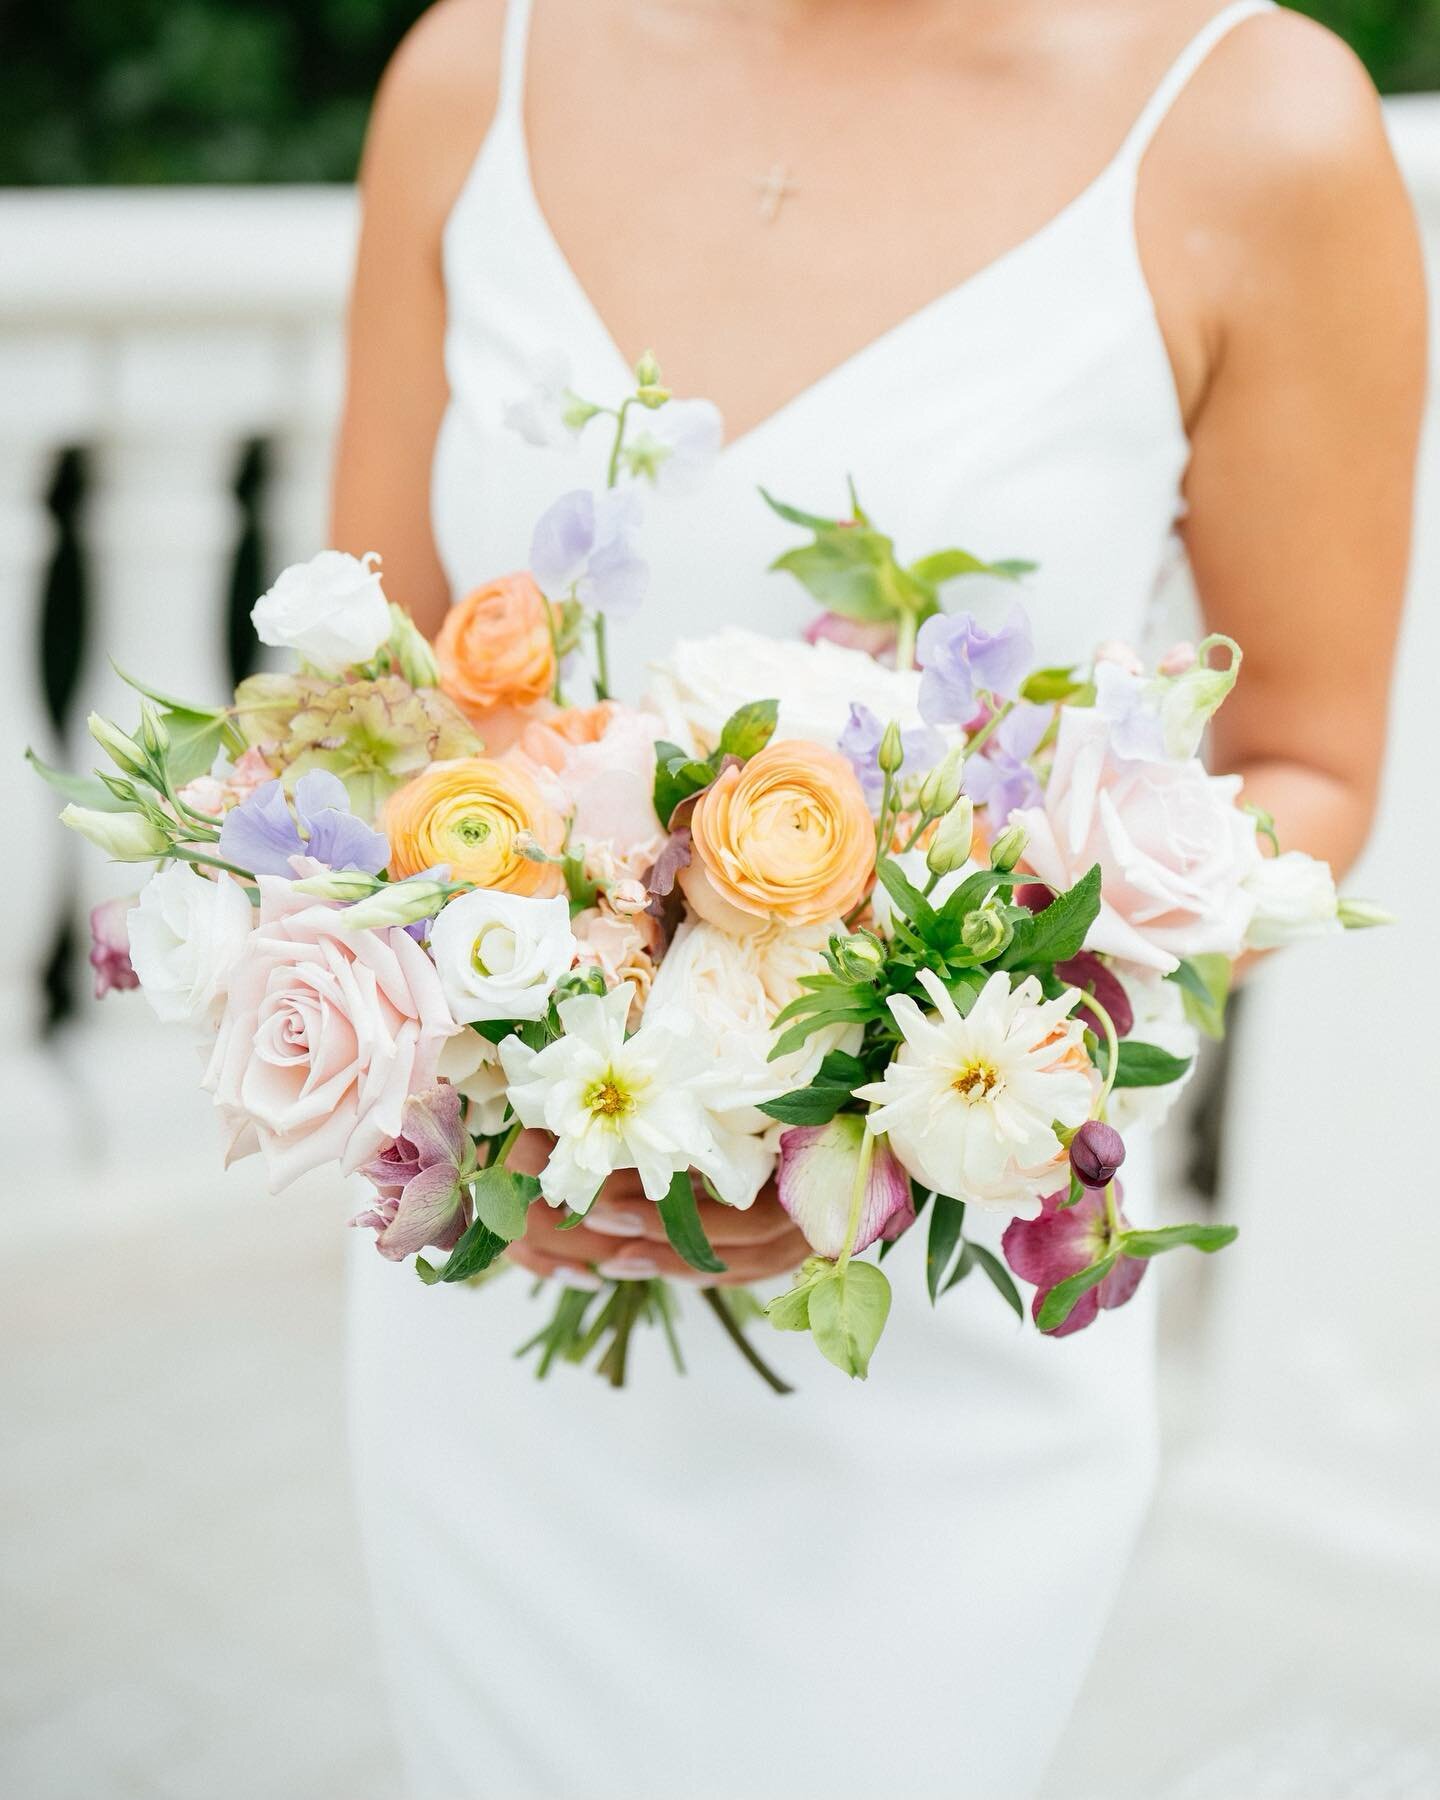 Jeanette&rsquo;s dainty, soft bridal bouquet made the perfect accessory to complete her bridal look. A stunning Spring bride she was!